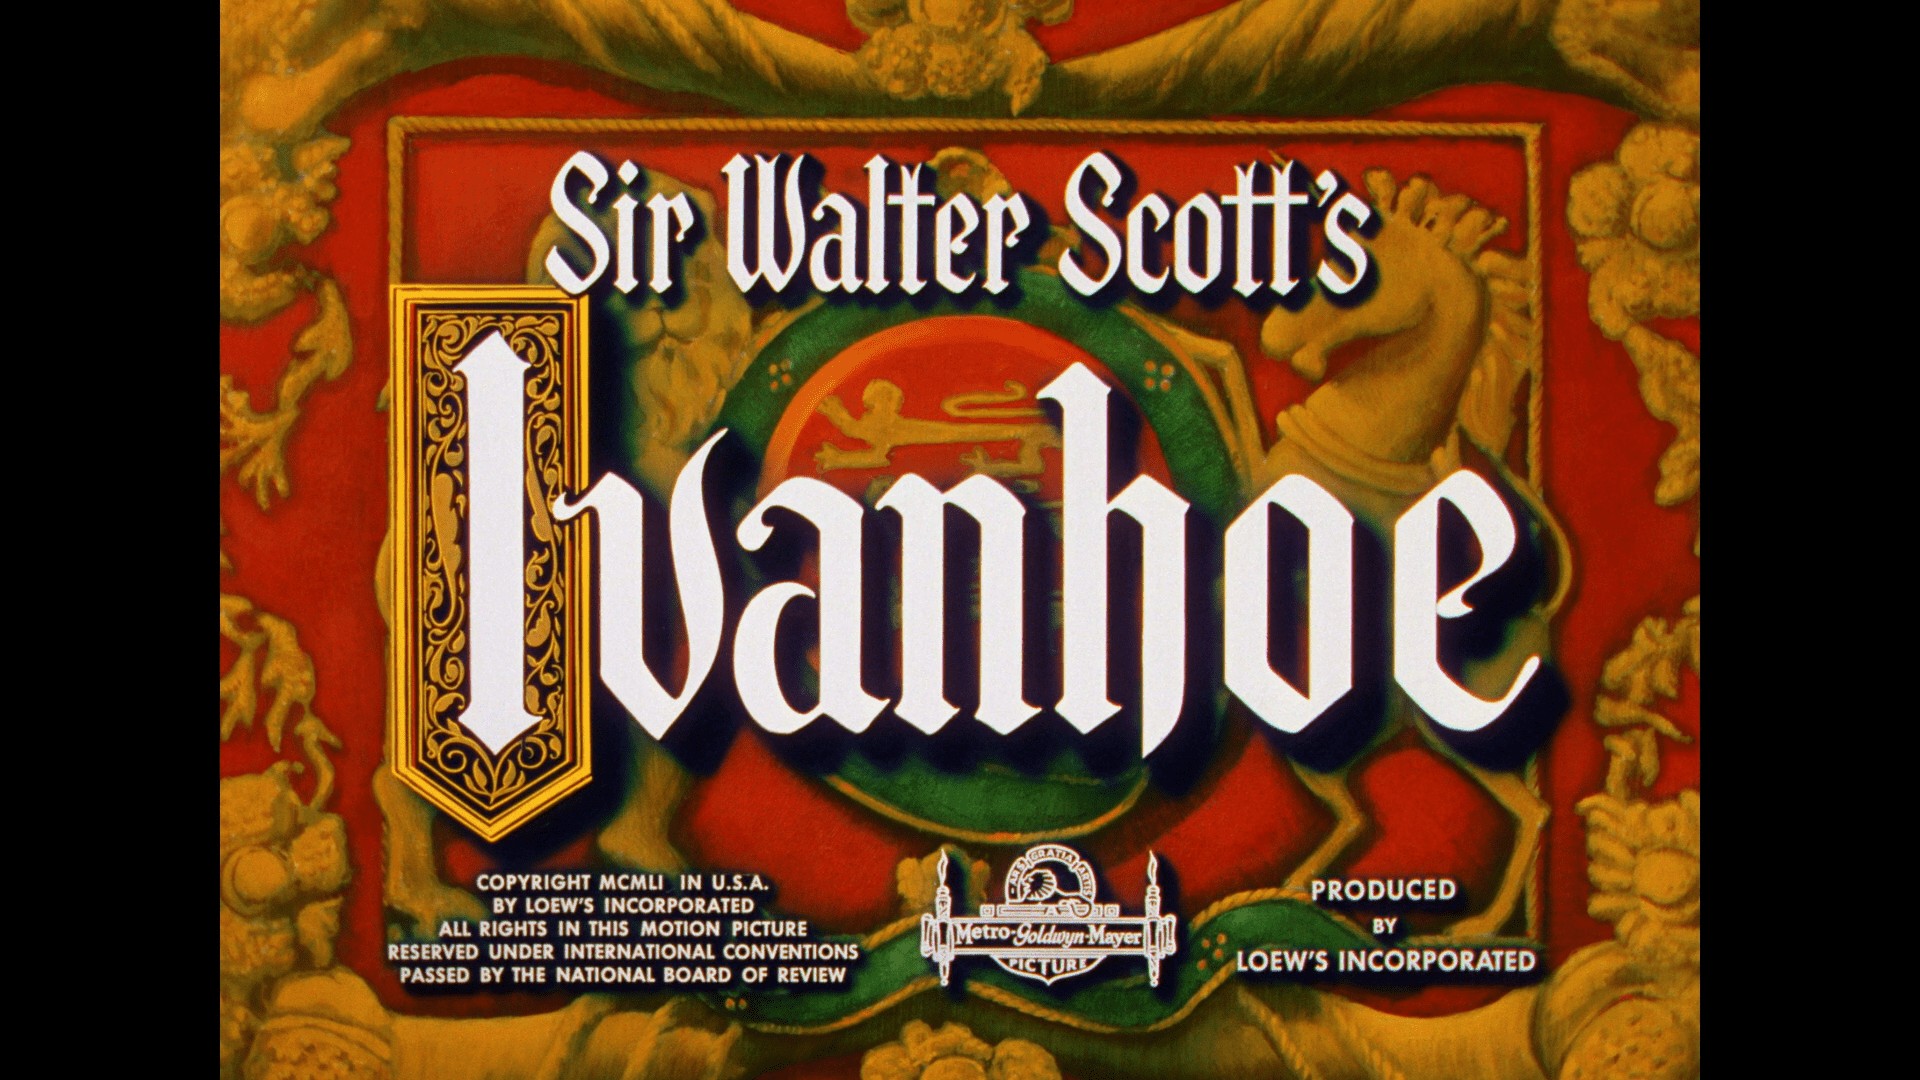 Ivanhoe title 31 Movies you can watch